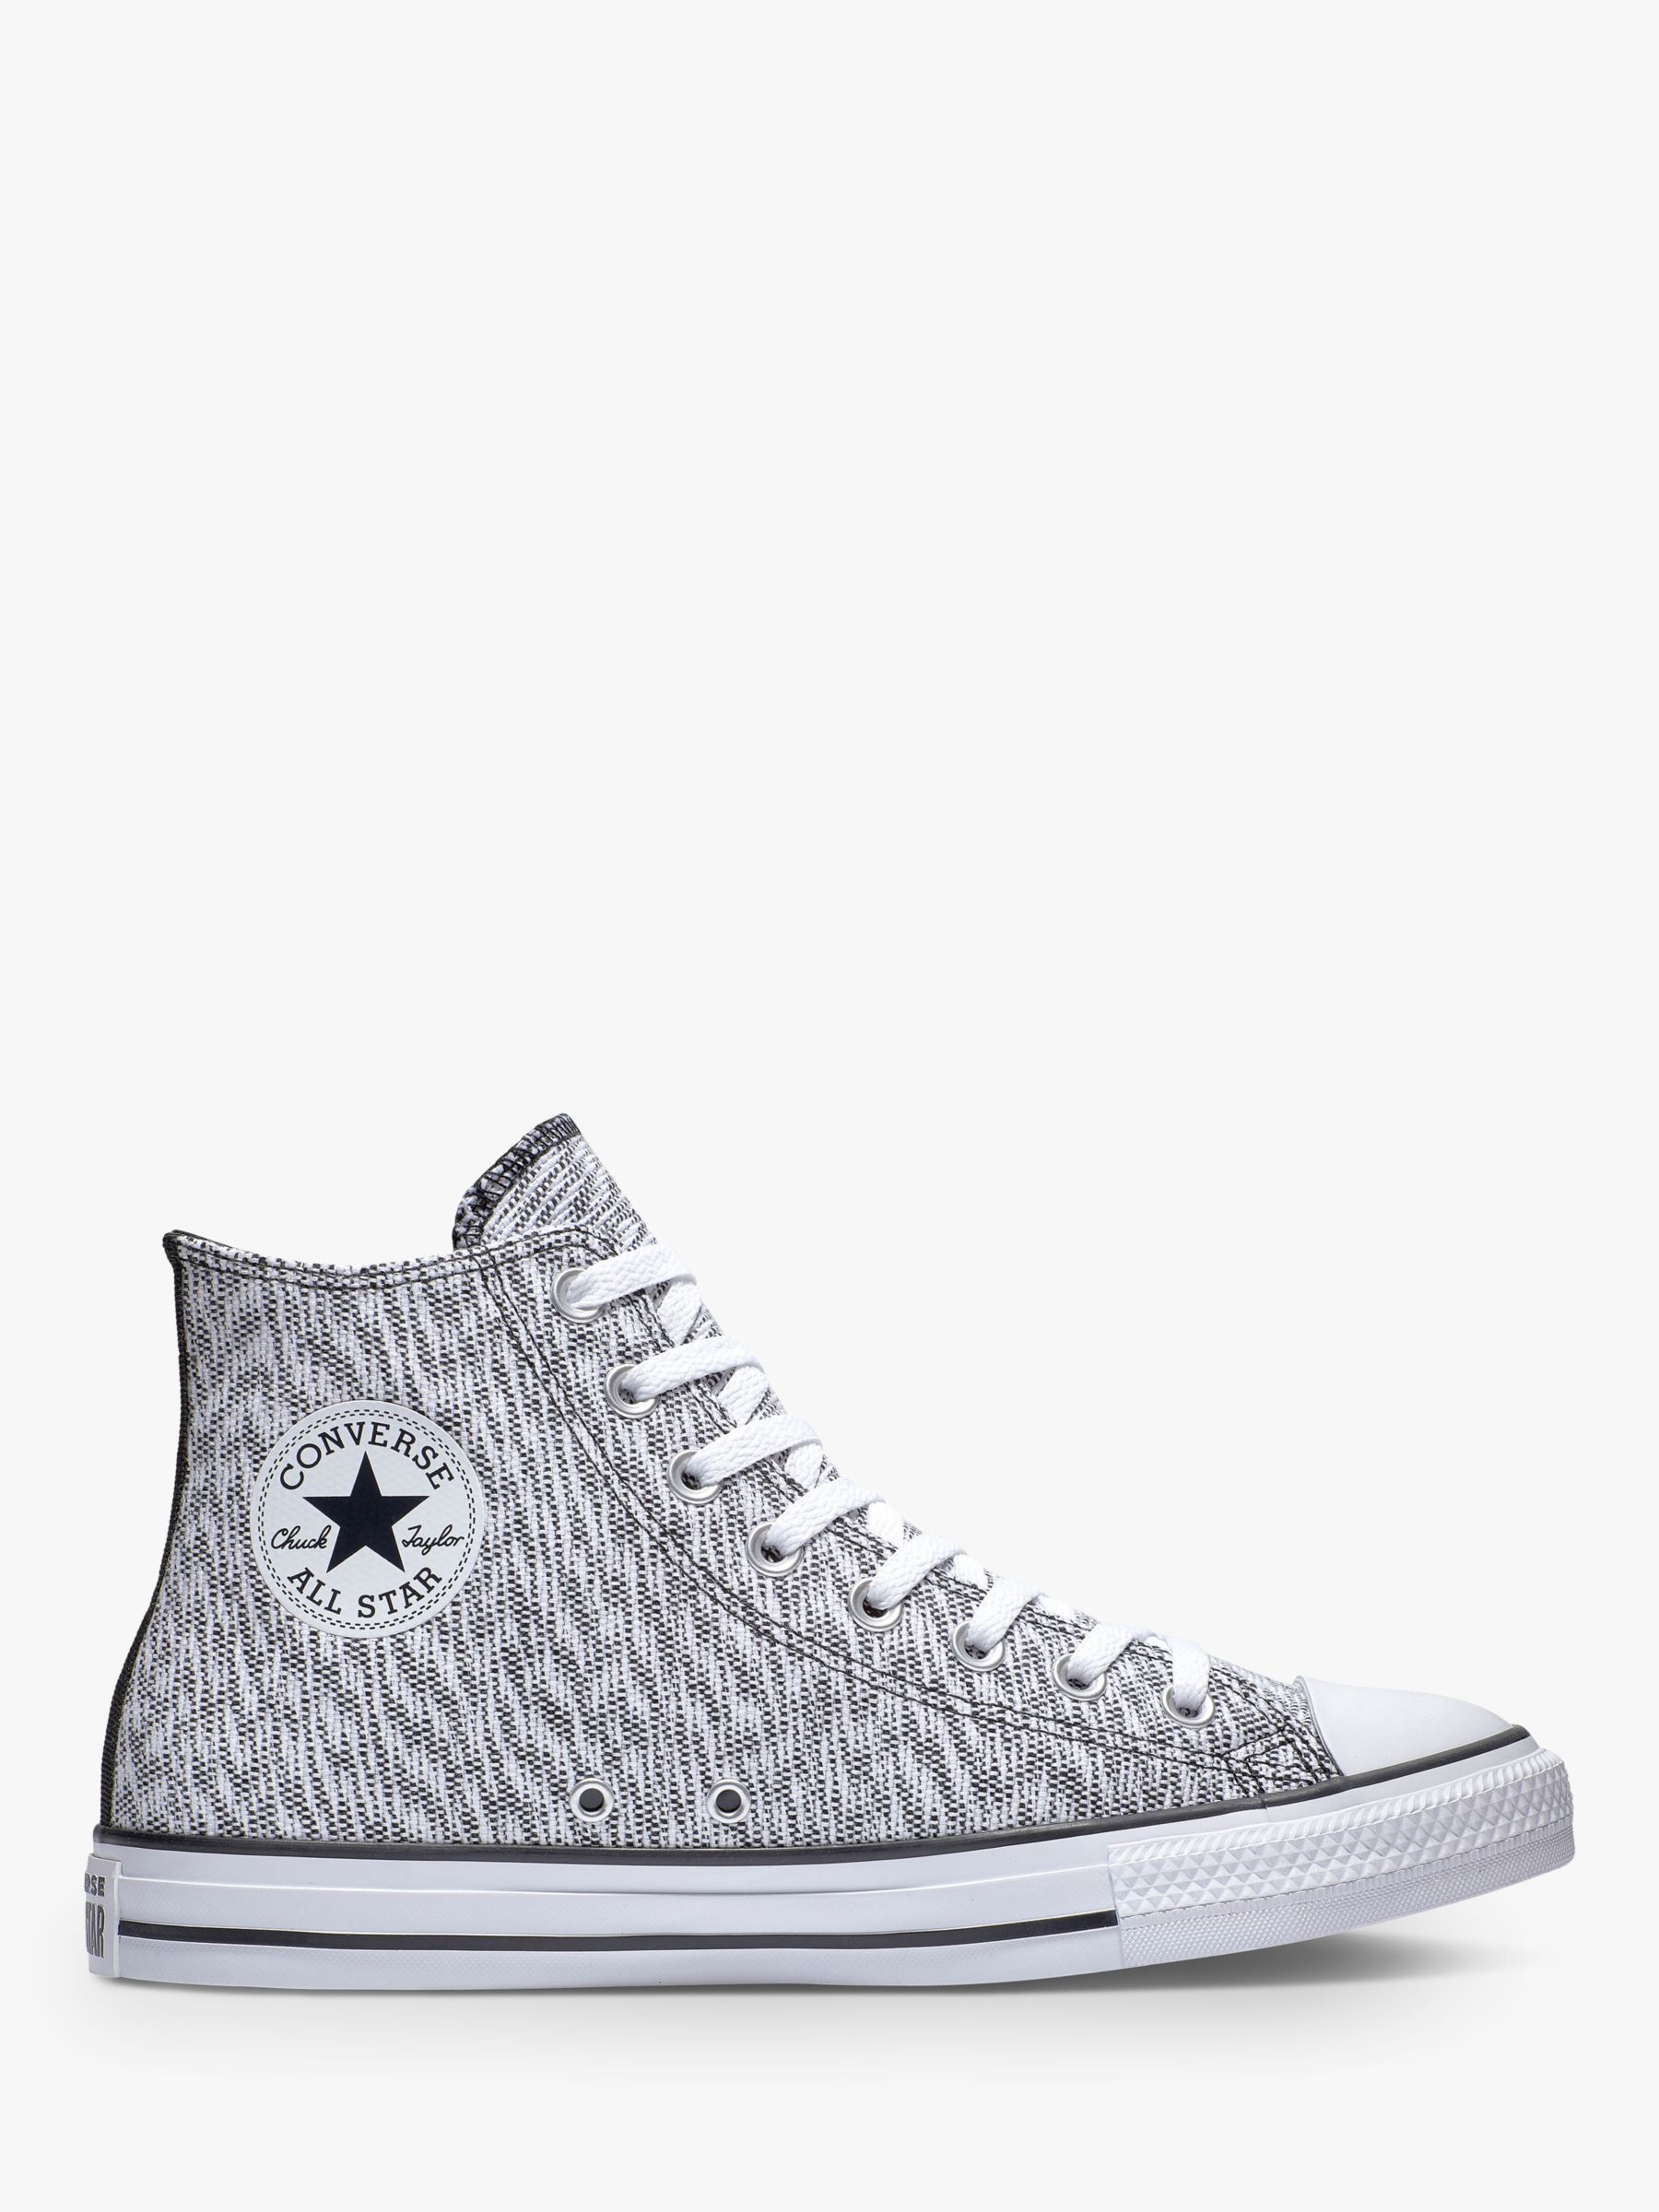 Converse Chuck Taylor All Star High-Top Trainers, Black/White at John Lewis  \u0026 Partners